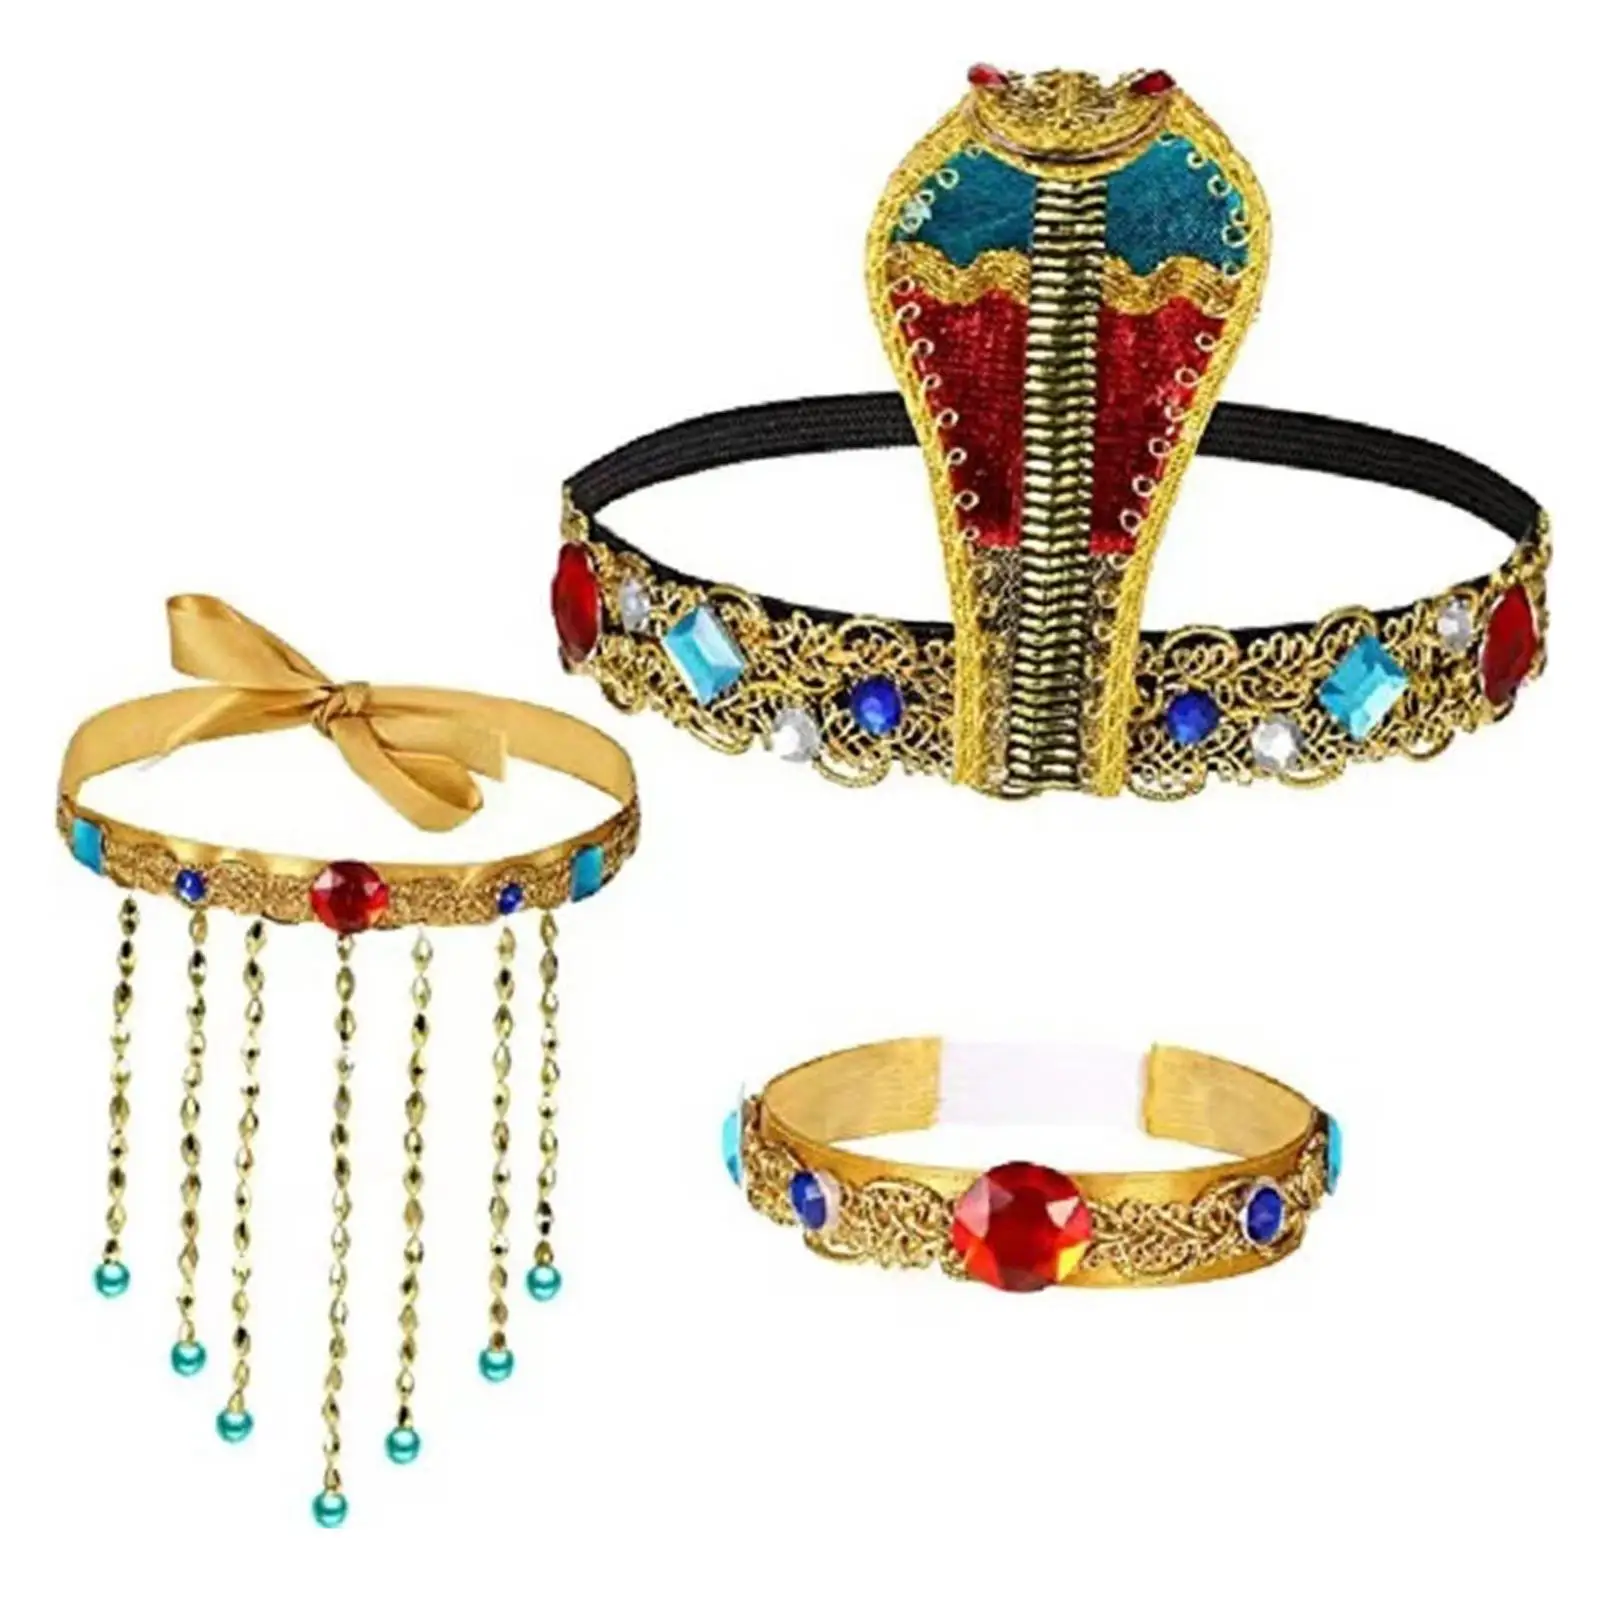 

1/3 Pcs Women's Egyptian Costume Egypt Queen Headdress Dress Up for Holidays Fancy Dress Cosplay Birthday Party Photo Props